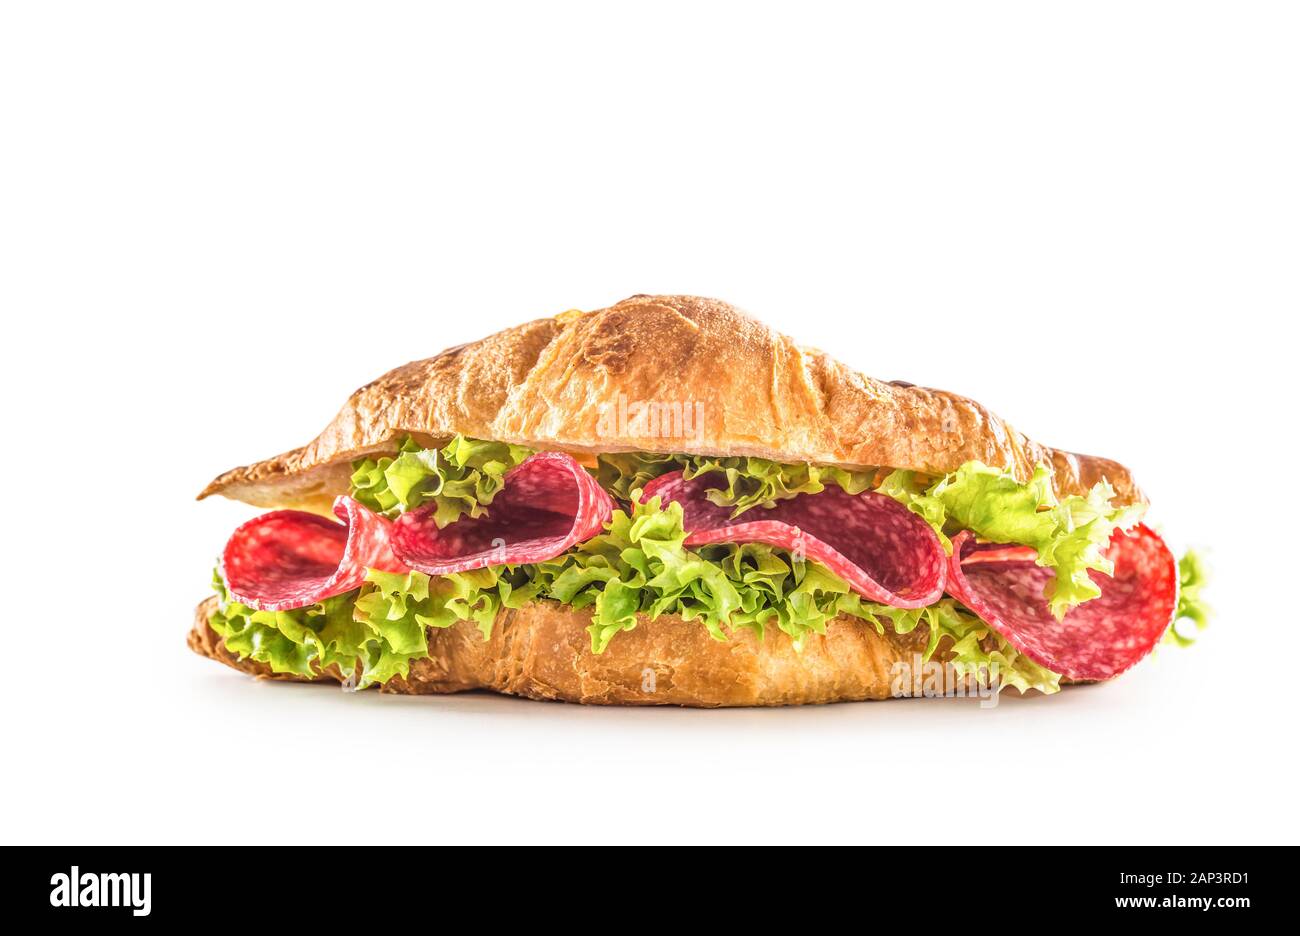 Croissant stuffed with lettuce salad and salami isolated on white background Stock Photo